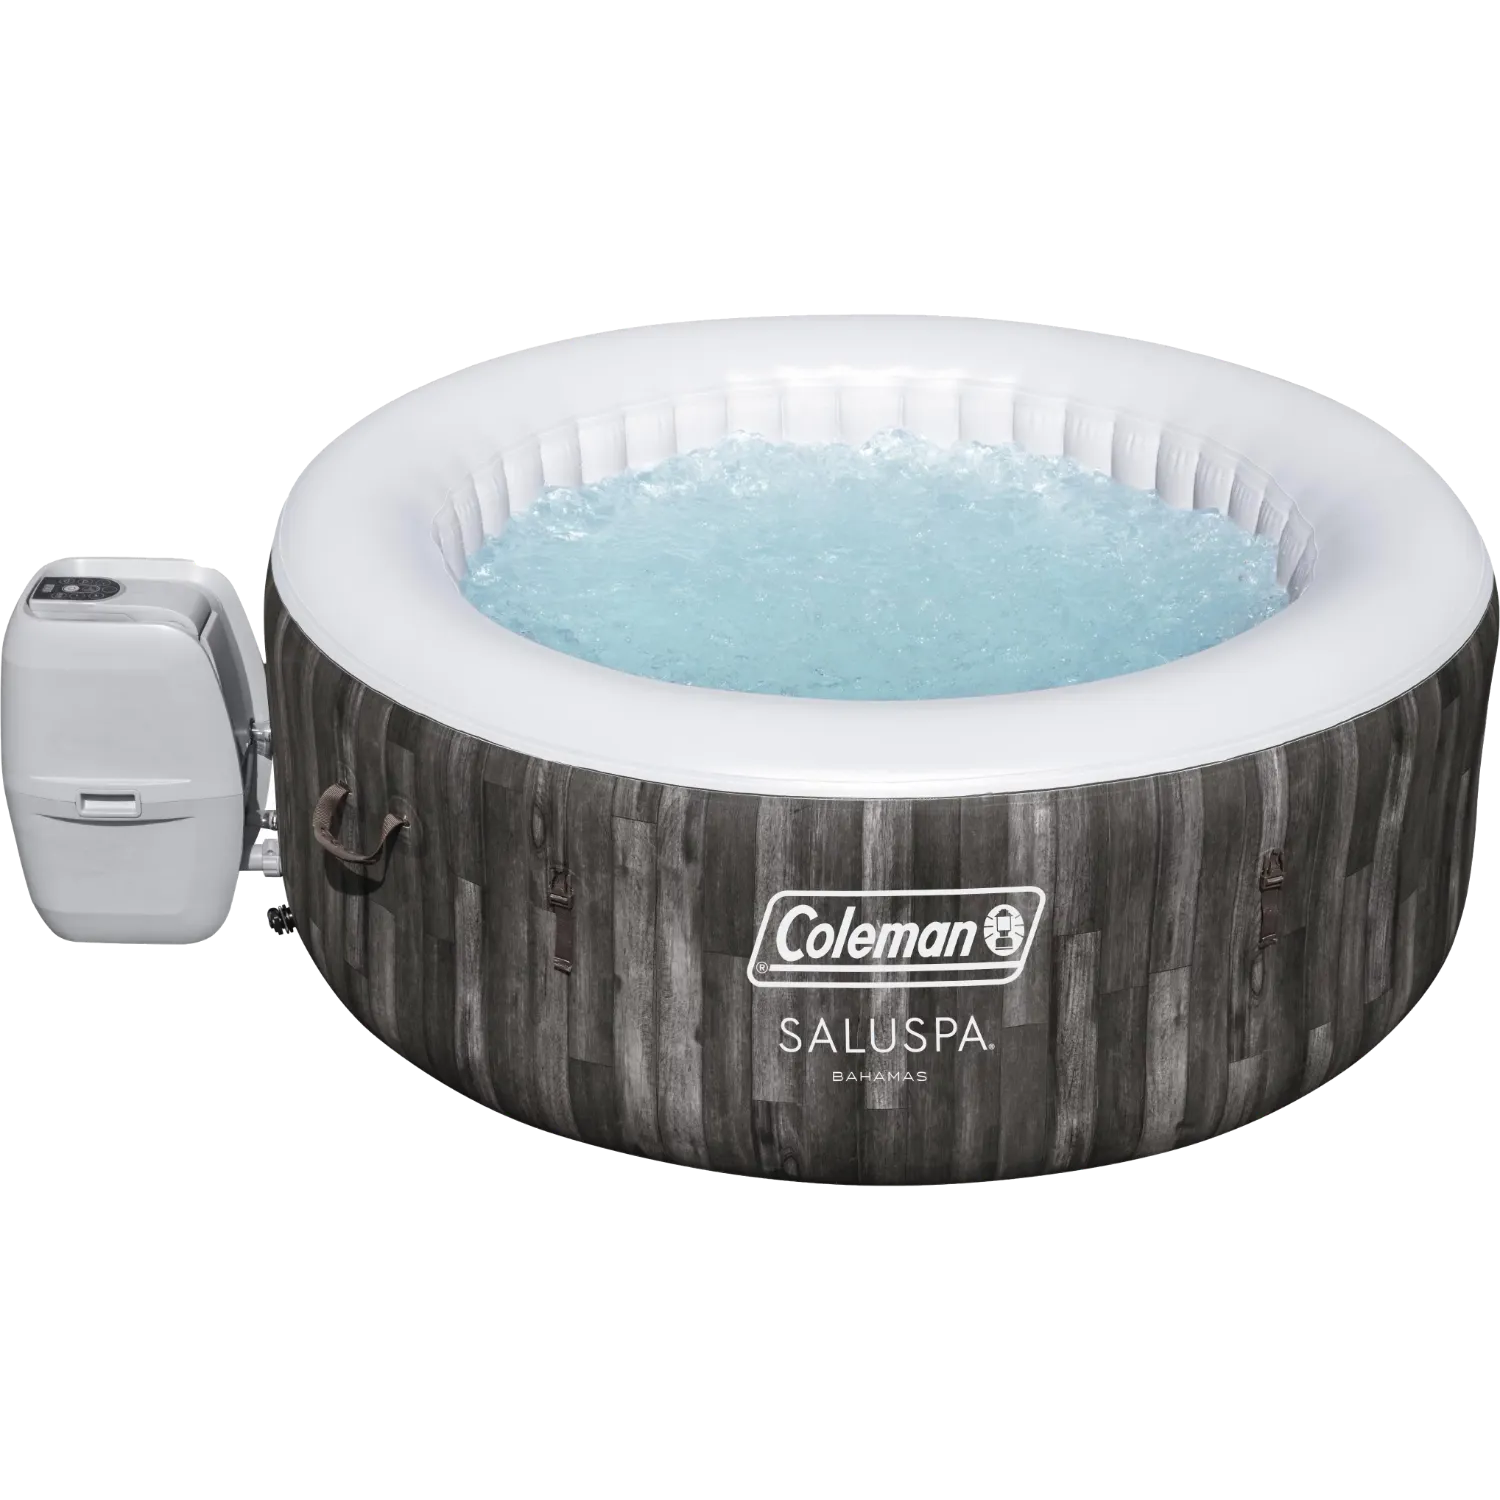 Free Coleman Bahamas Airjet Inflatable Hot Tub